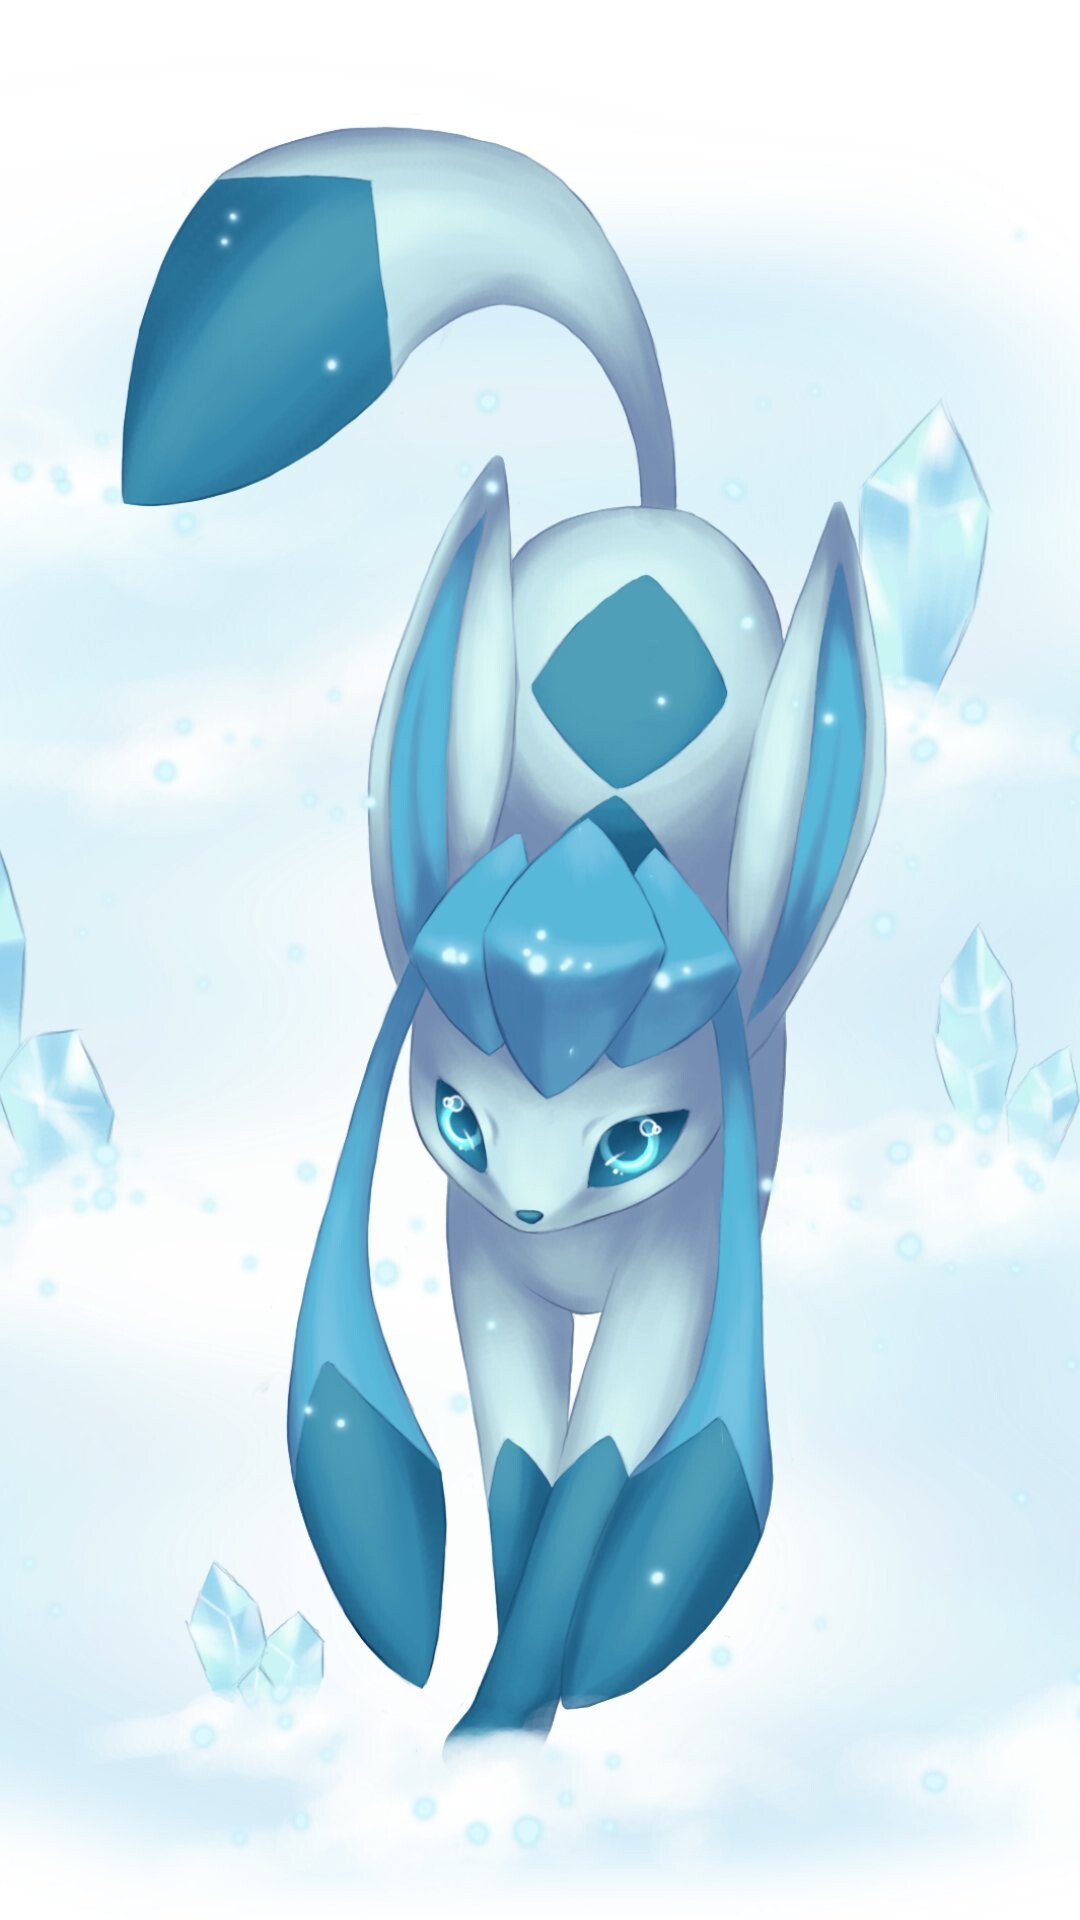 Glaceon: Pokemon appearing at ski resort, Enamoring the victims through their captivating beauty. 1080x1920 Full HD Wallpaper.